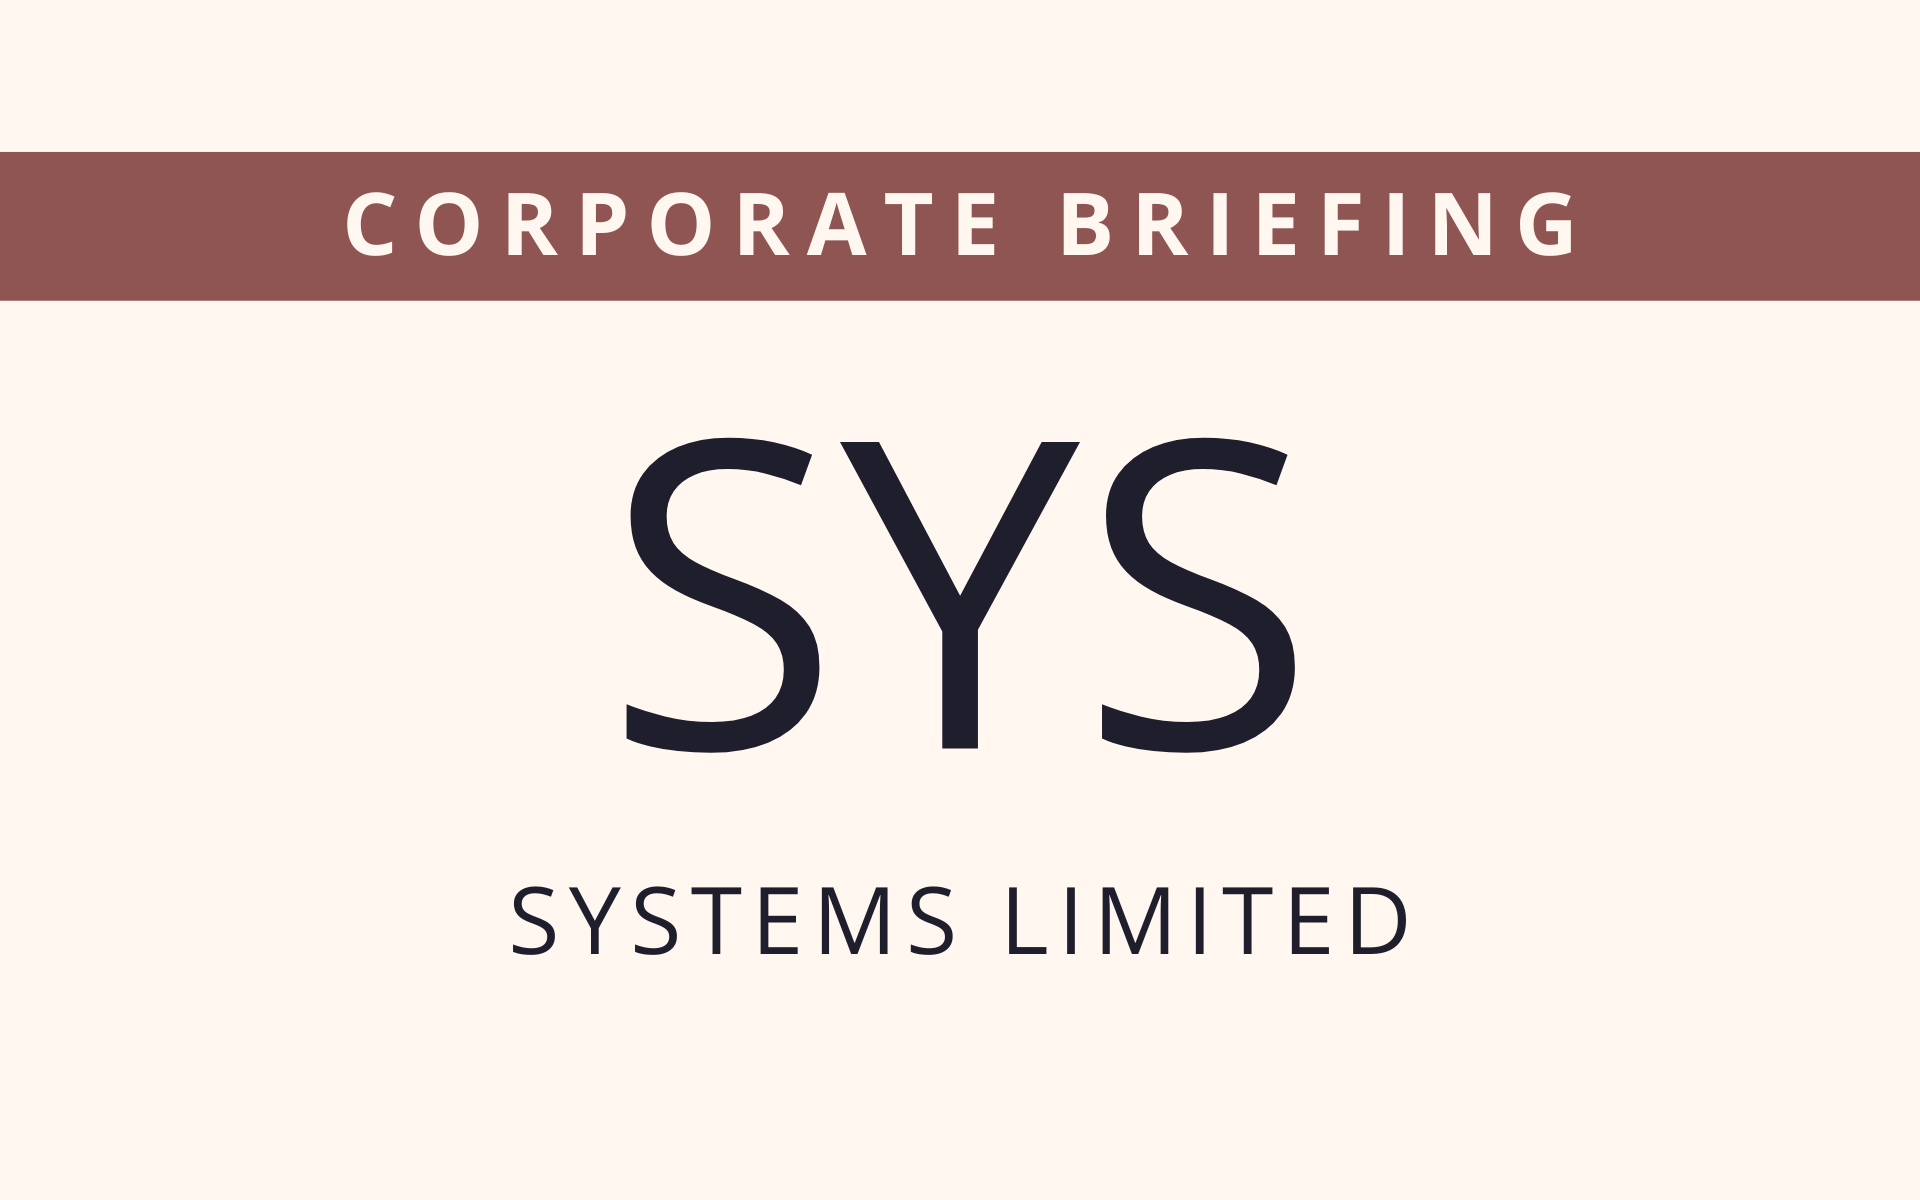 SYS - Corporate Briefing